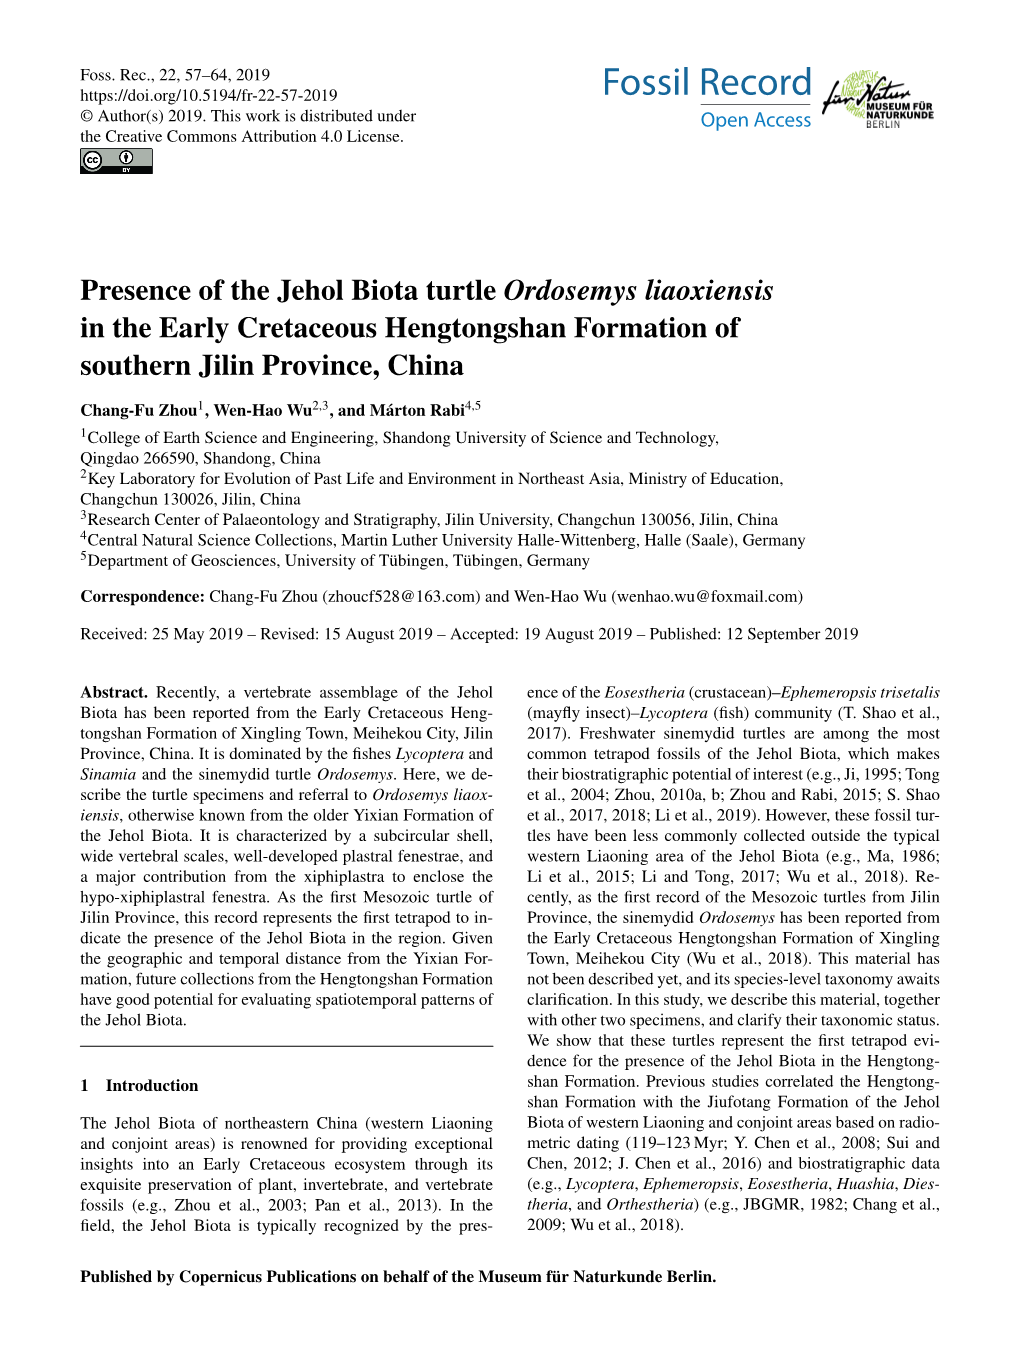 Presence of the Jehol Biota Turtle Ordosemys Liaoxiensis in the Early Cretaceous Hengtongshan Formation of Southern Jilin Province, China